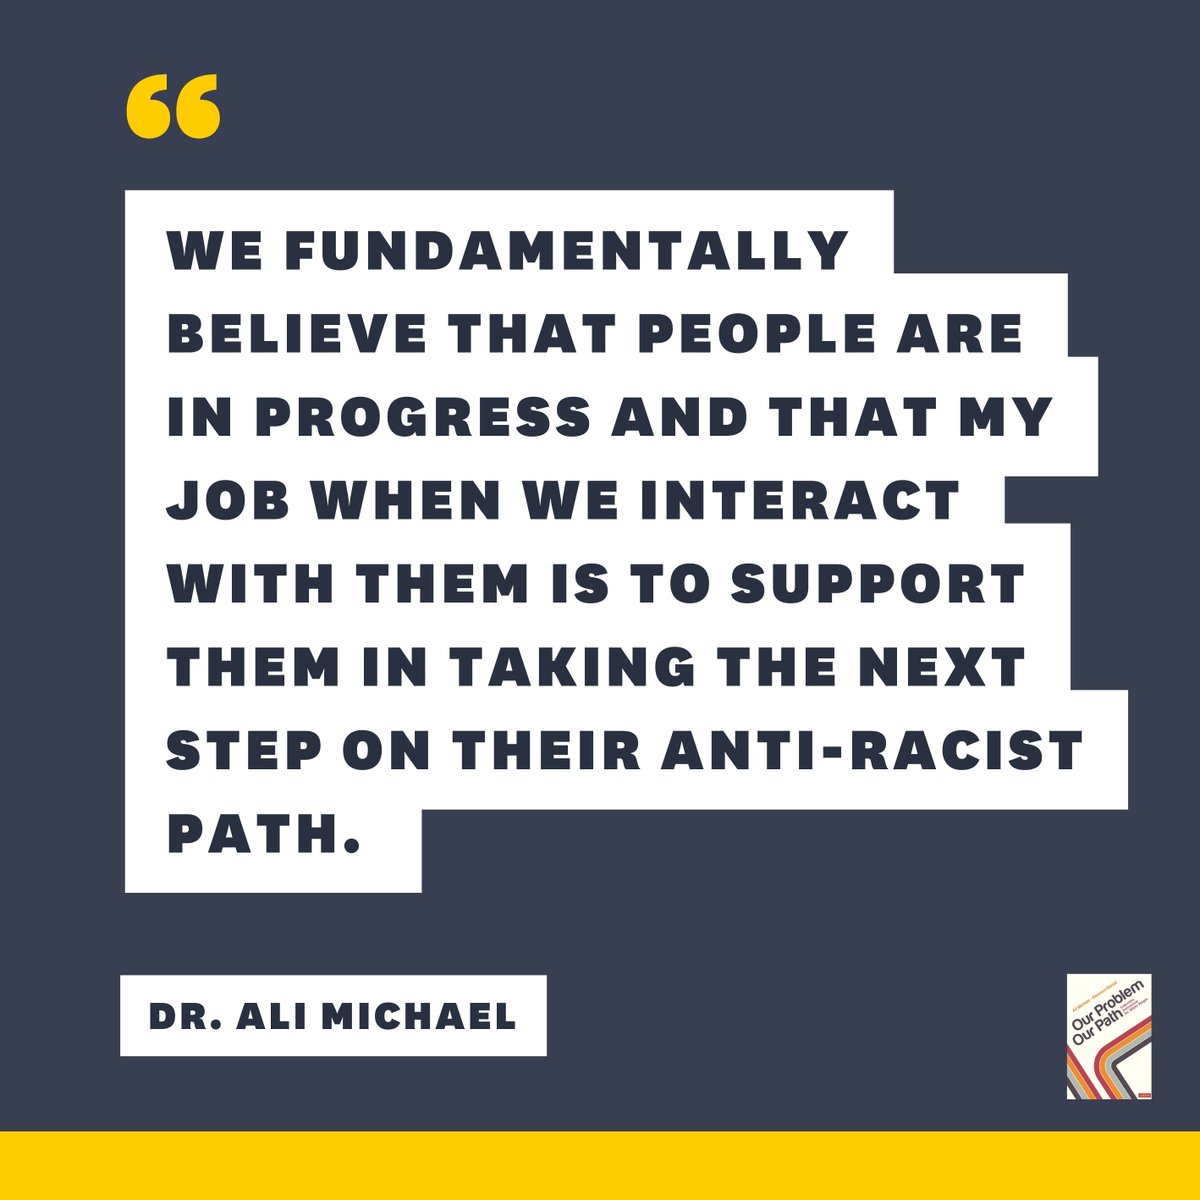 .#ICYMI: Dr. Ali Michael discussed how to support people in our lives on their anti-racist paths during our #BookTalk Series. Help one another thoughtfully. Save your spot & join the next one with Toby Jenkins on Monday, June 3 at 4 pm PST. uscrec.info/hiphopmindset